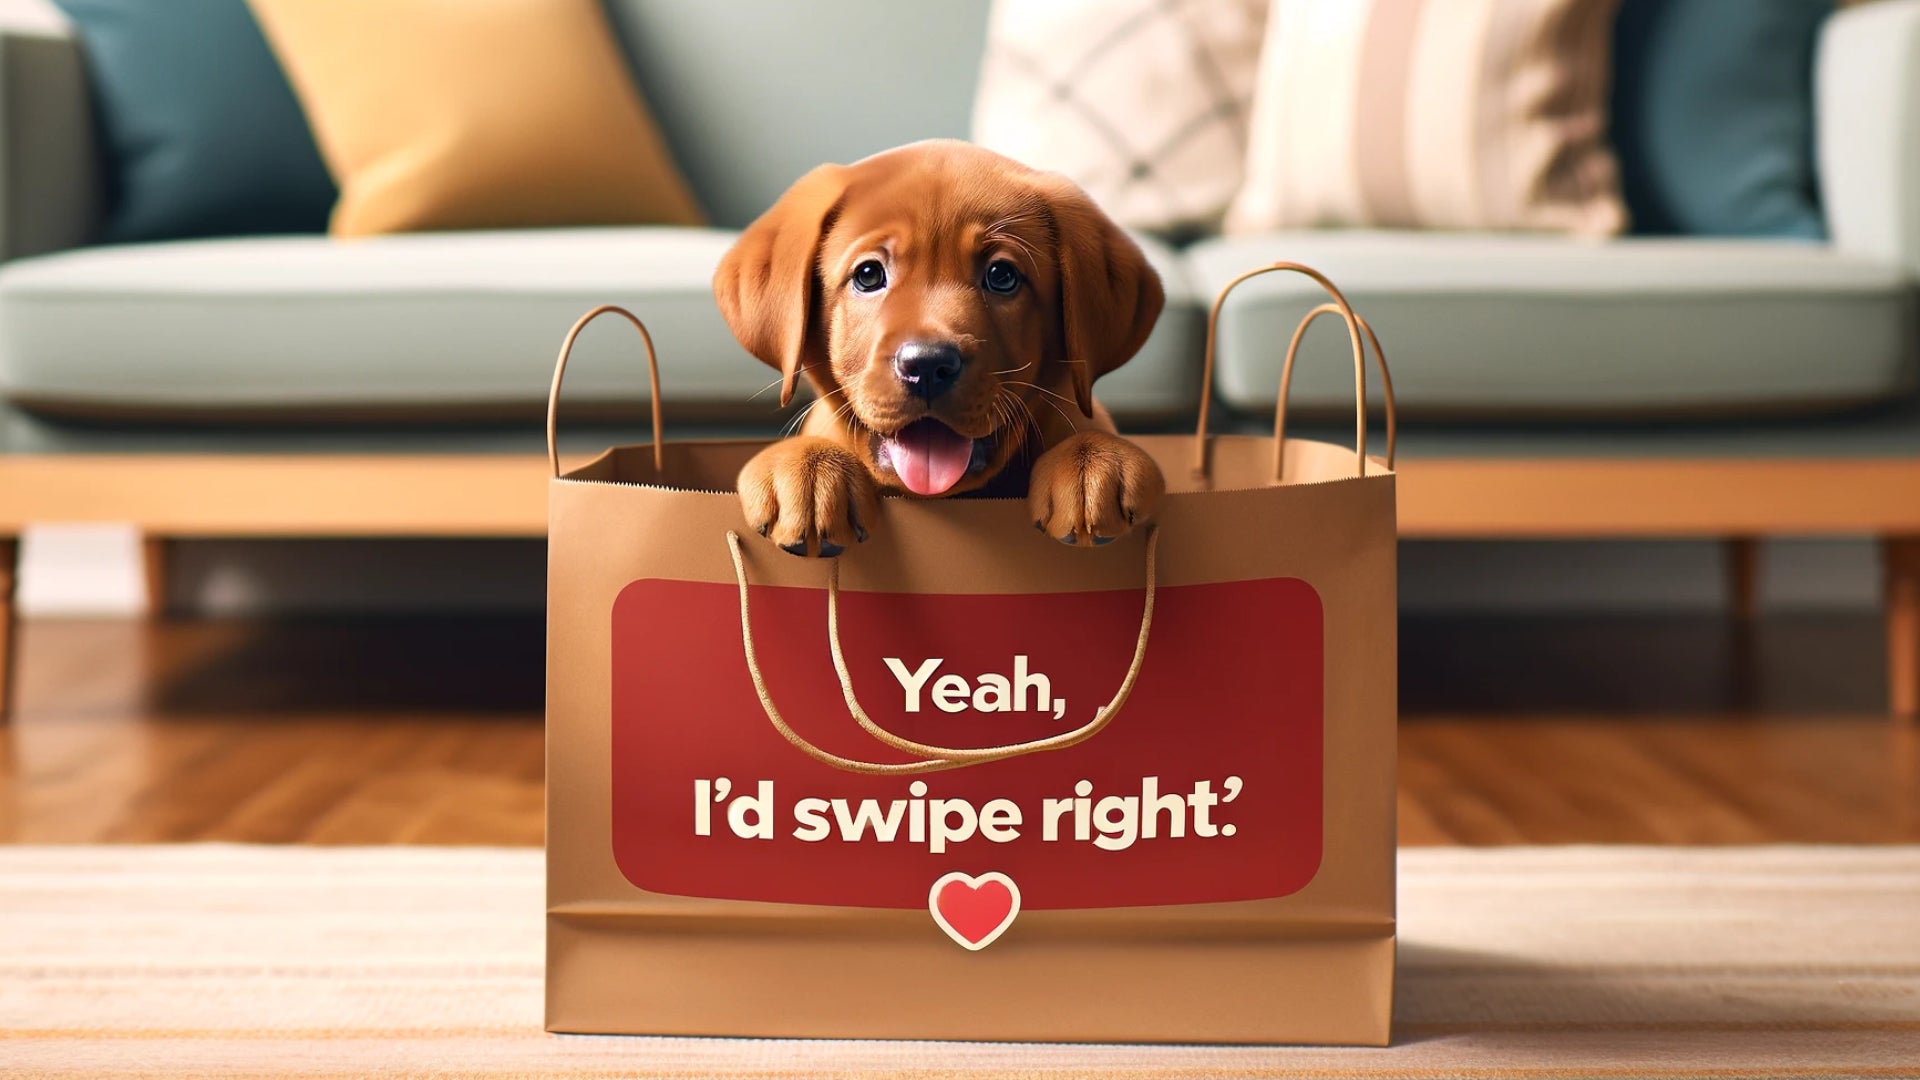 Red Lab puppy peeking out from a shopping bag